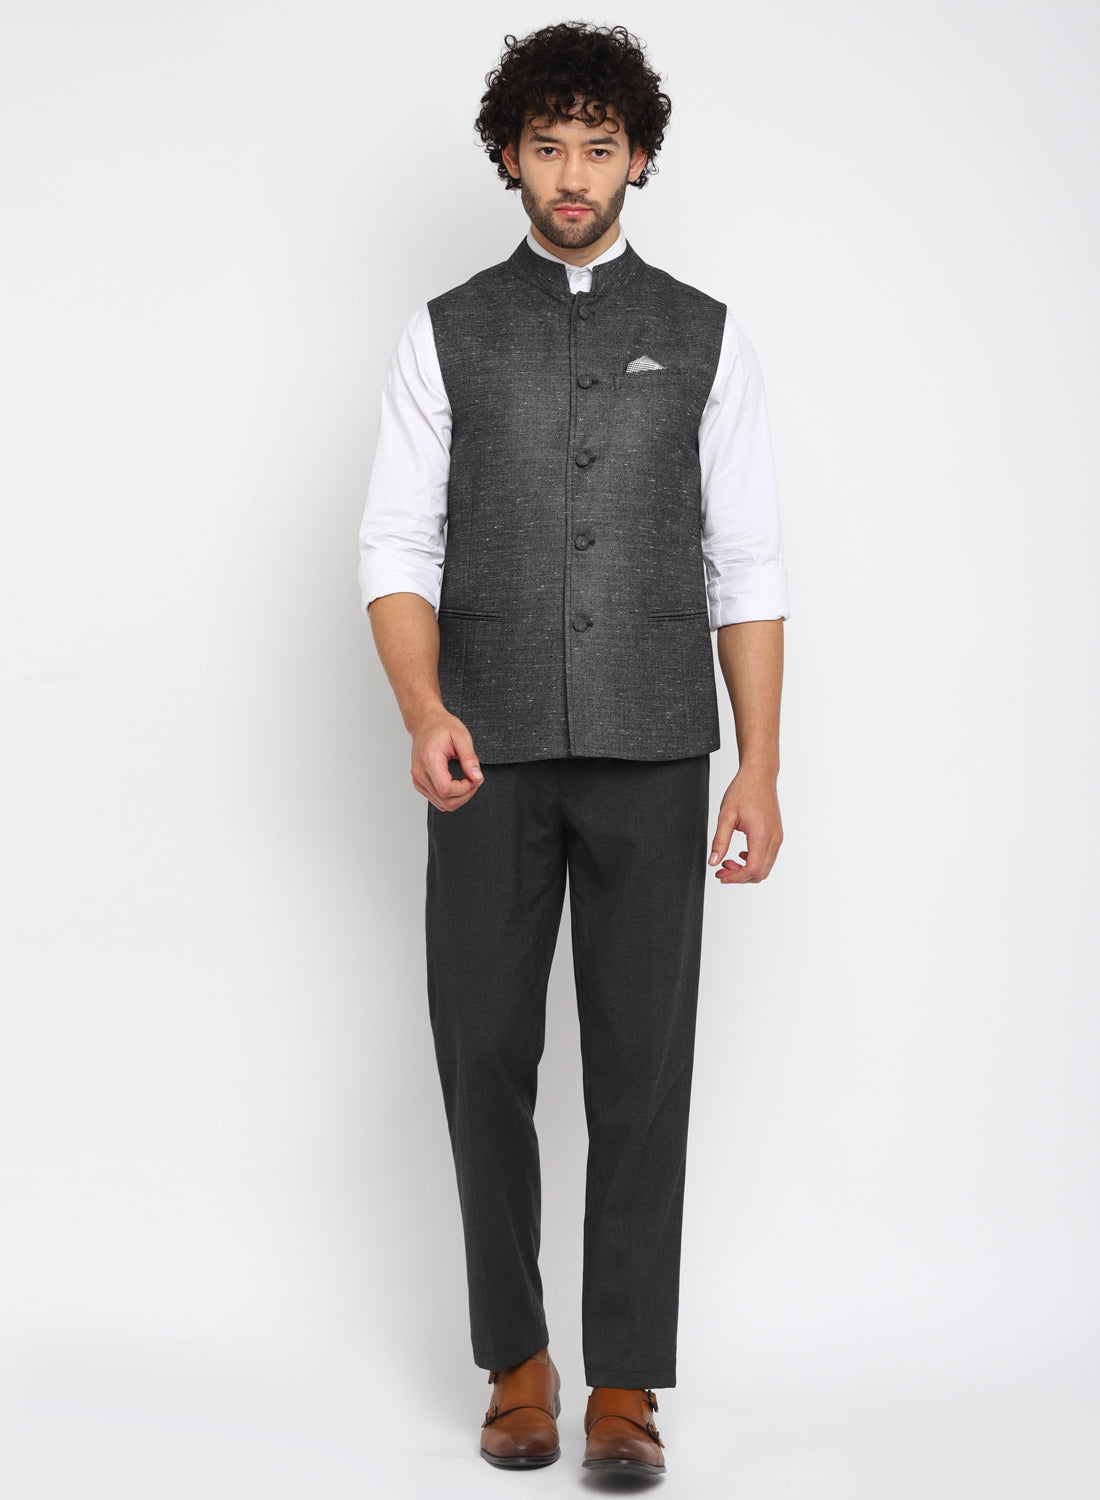 What are the best color combinations of sleeveless a Nehru jacket and a  Kurta? - Quora